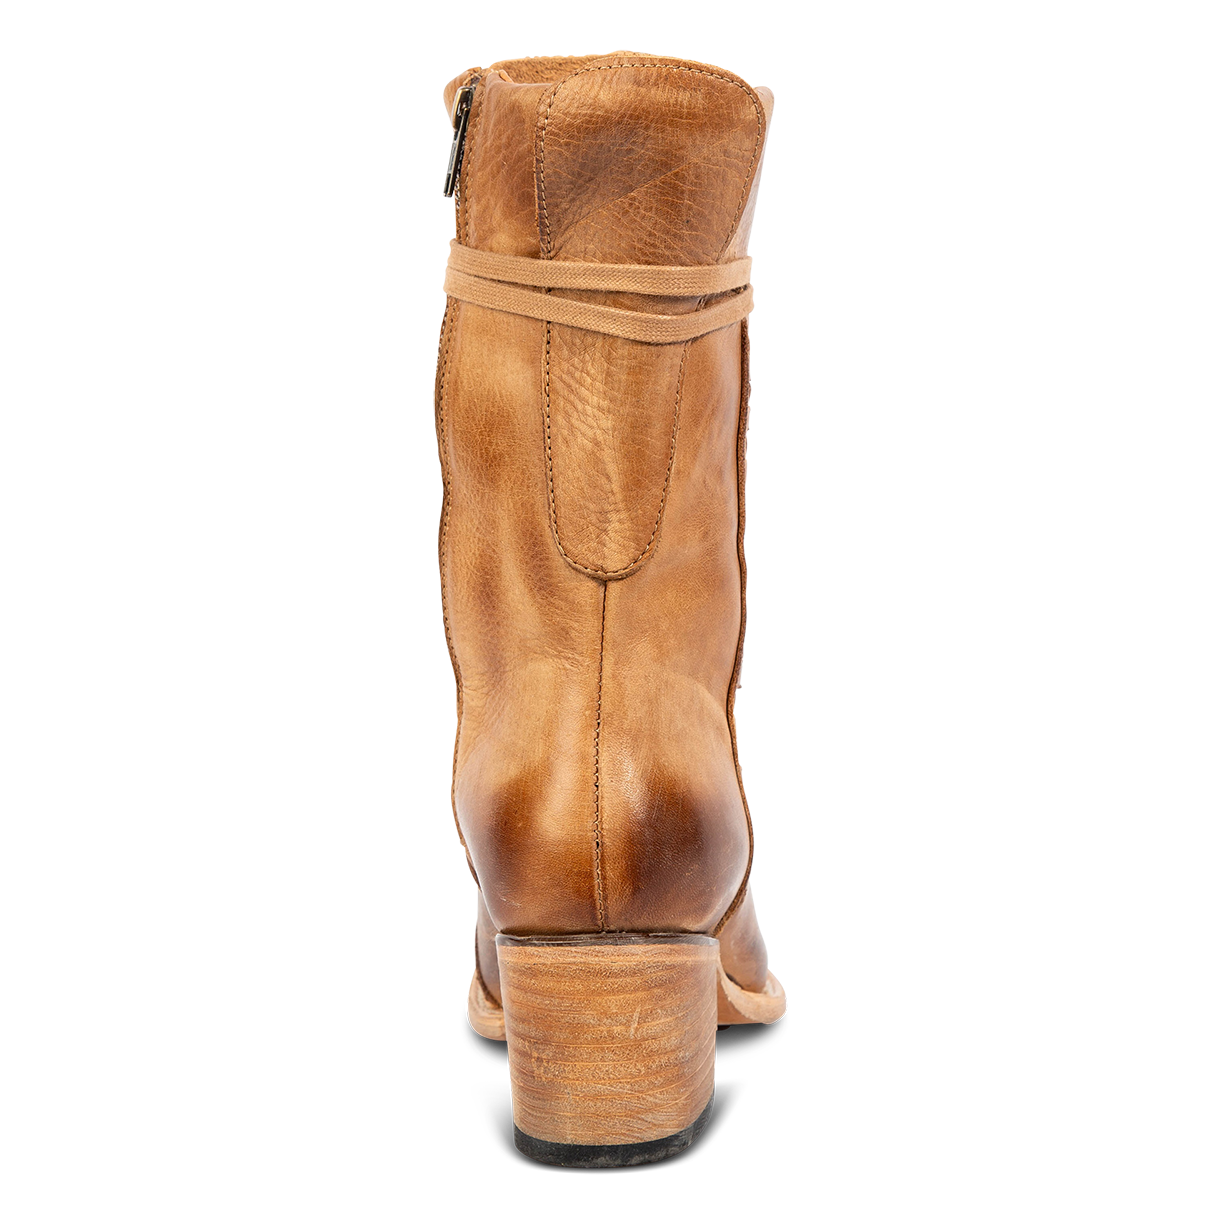 Back view showing stacked heel and working brass inside closure on FREEBIRD women's Dart wheat leather boot